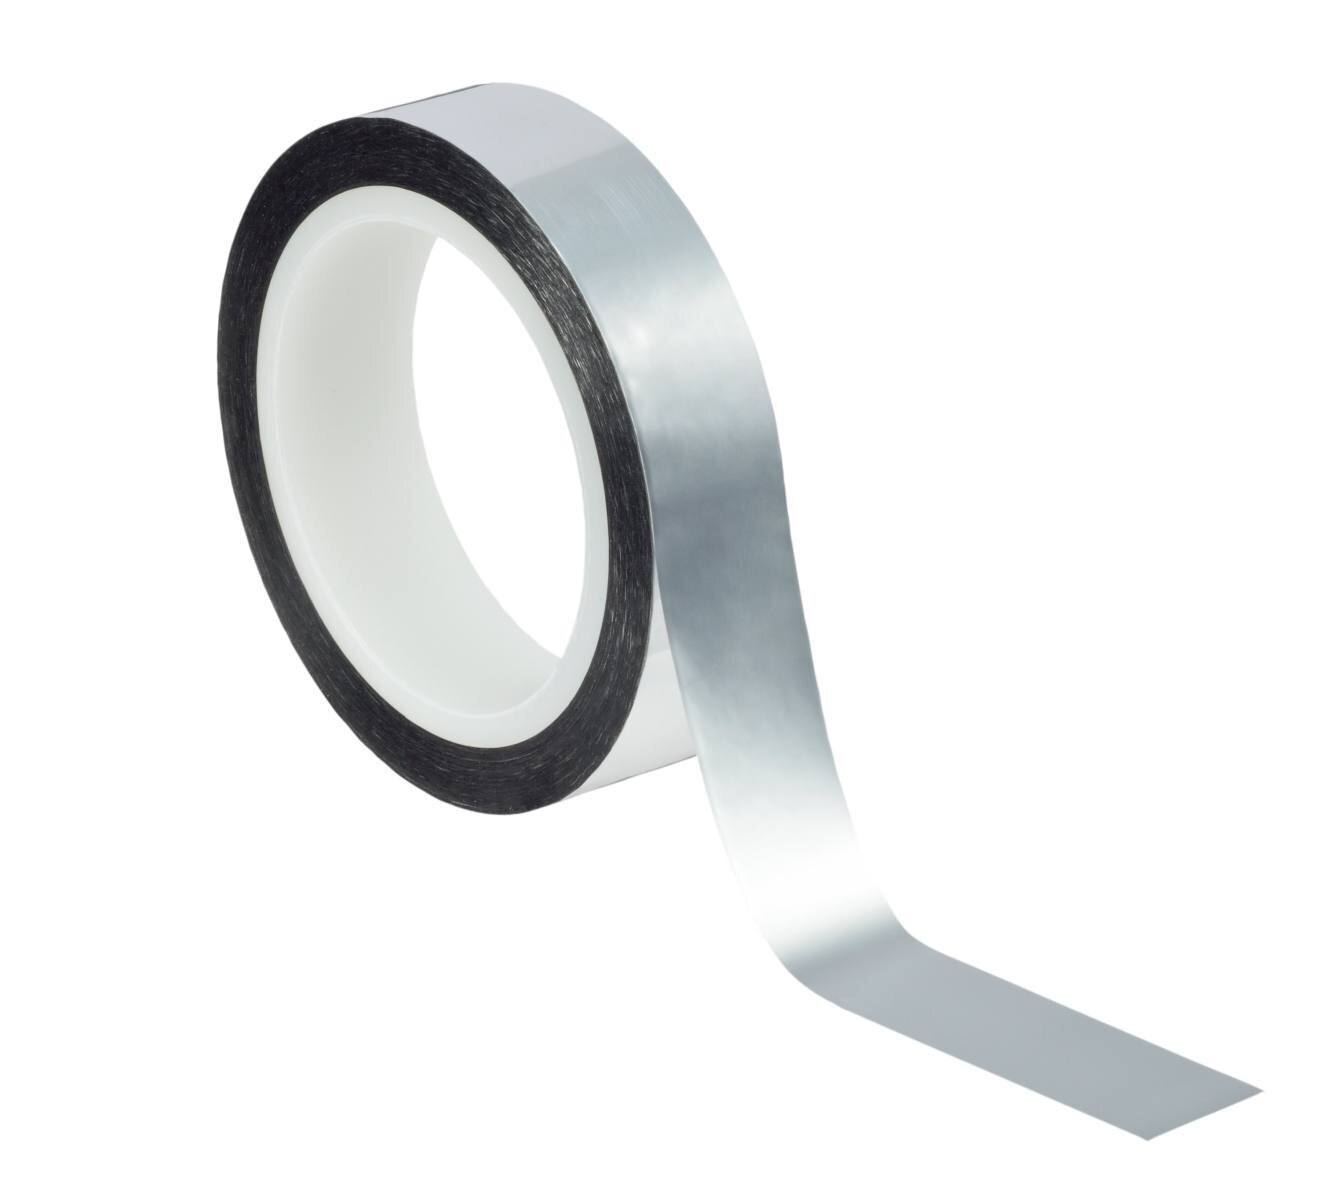 3M polyester adhesive tape 850 S, silver, 50 mm x 66 m, 0.05 mm